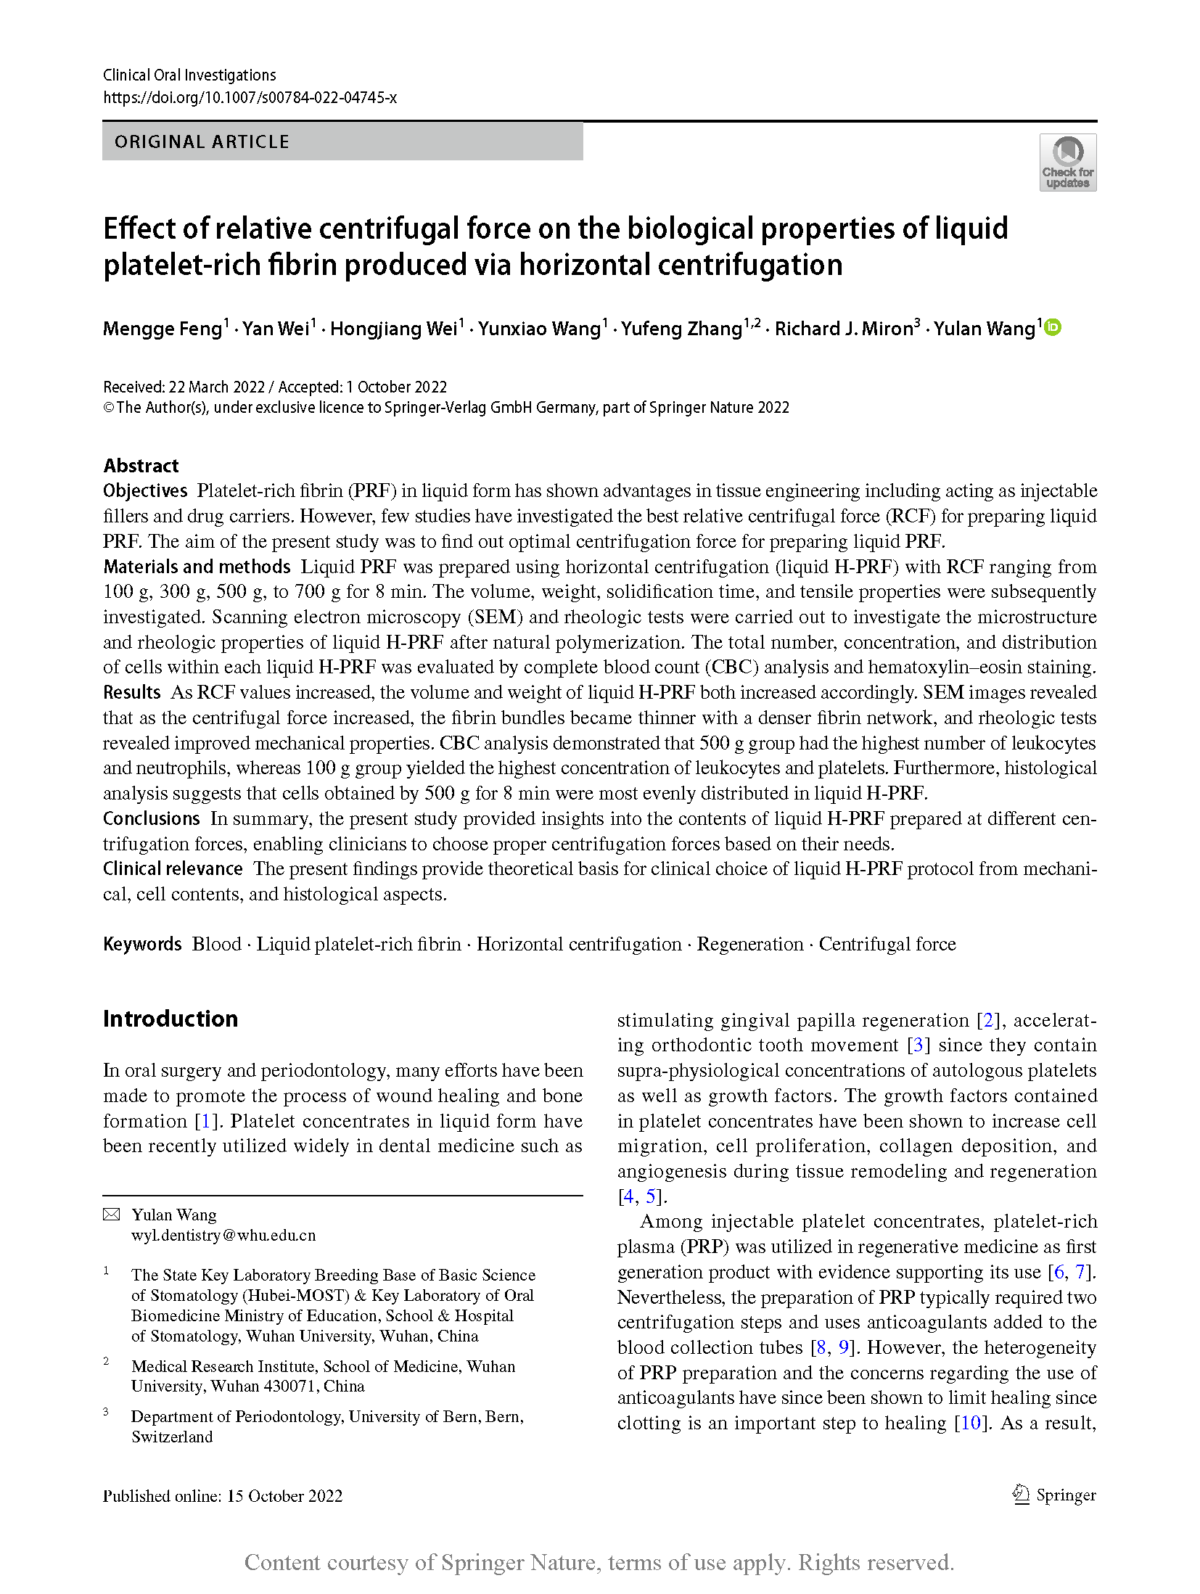 Effect of relative centrifugal force on the biological properties of liquid platelet-rich fibrin produced via horizontal centrifugation